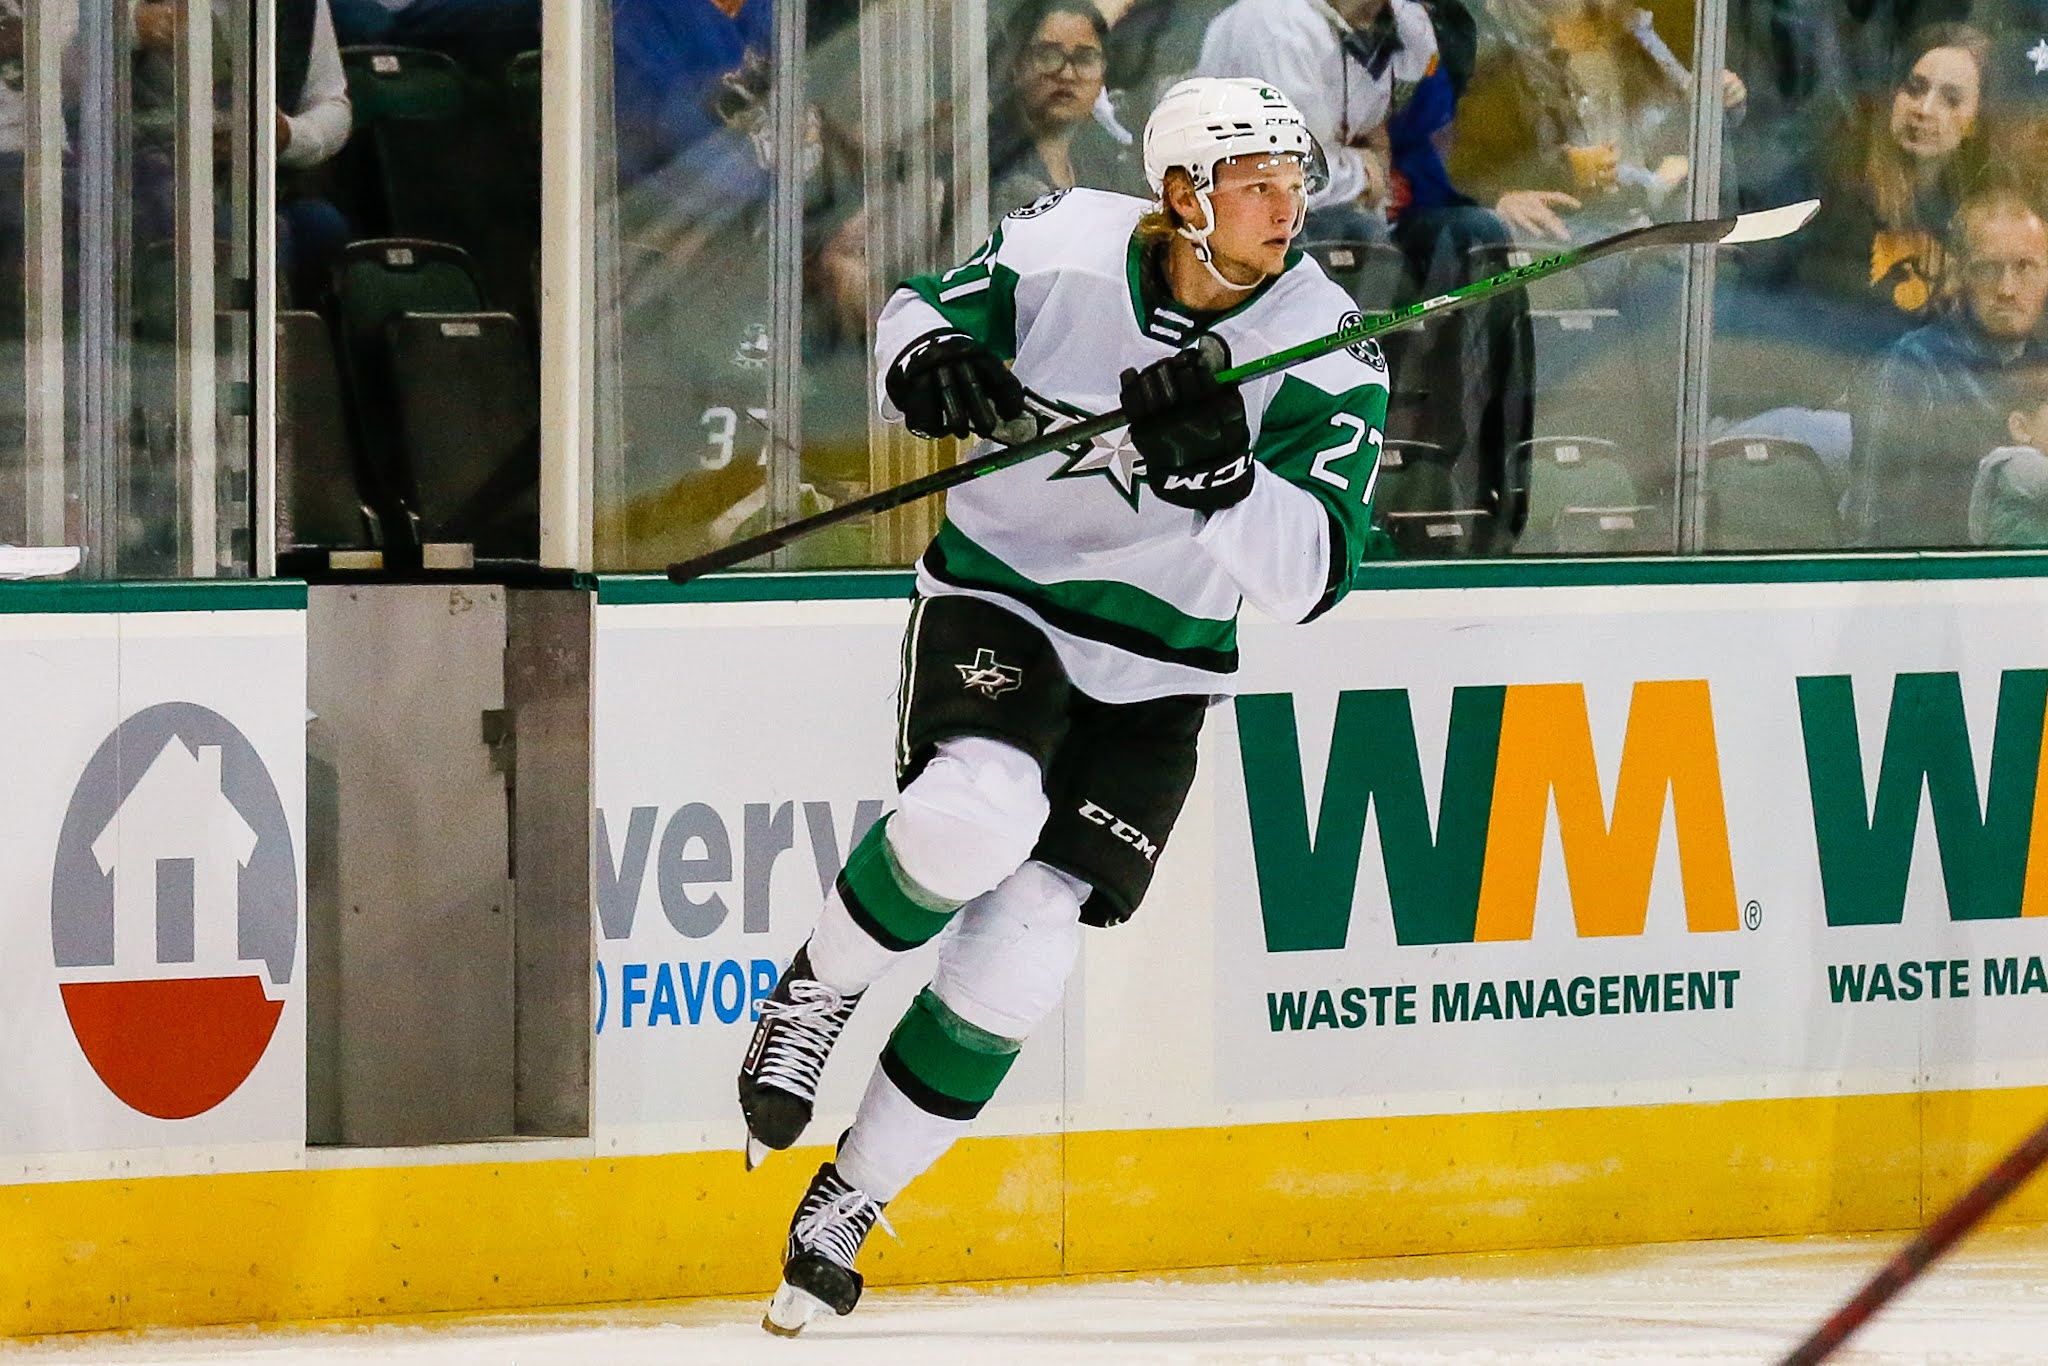 Neil Graham is back to hockey as usual in his role as Texas Stars